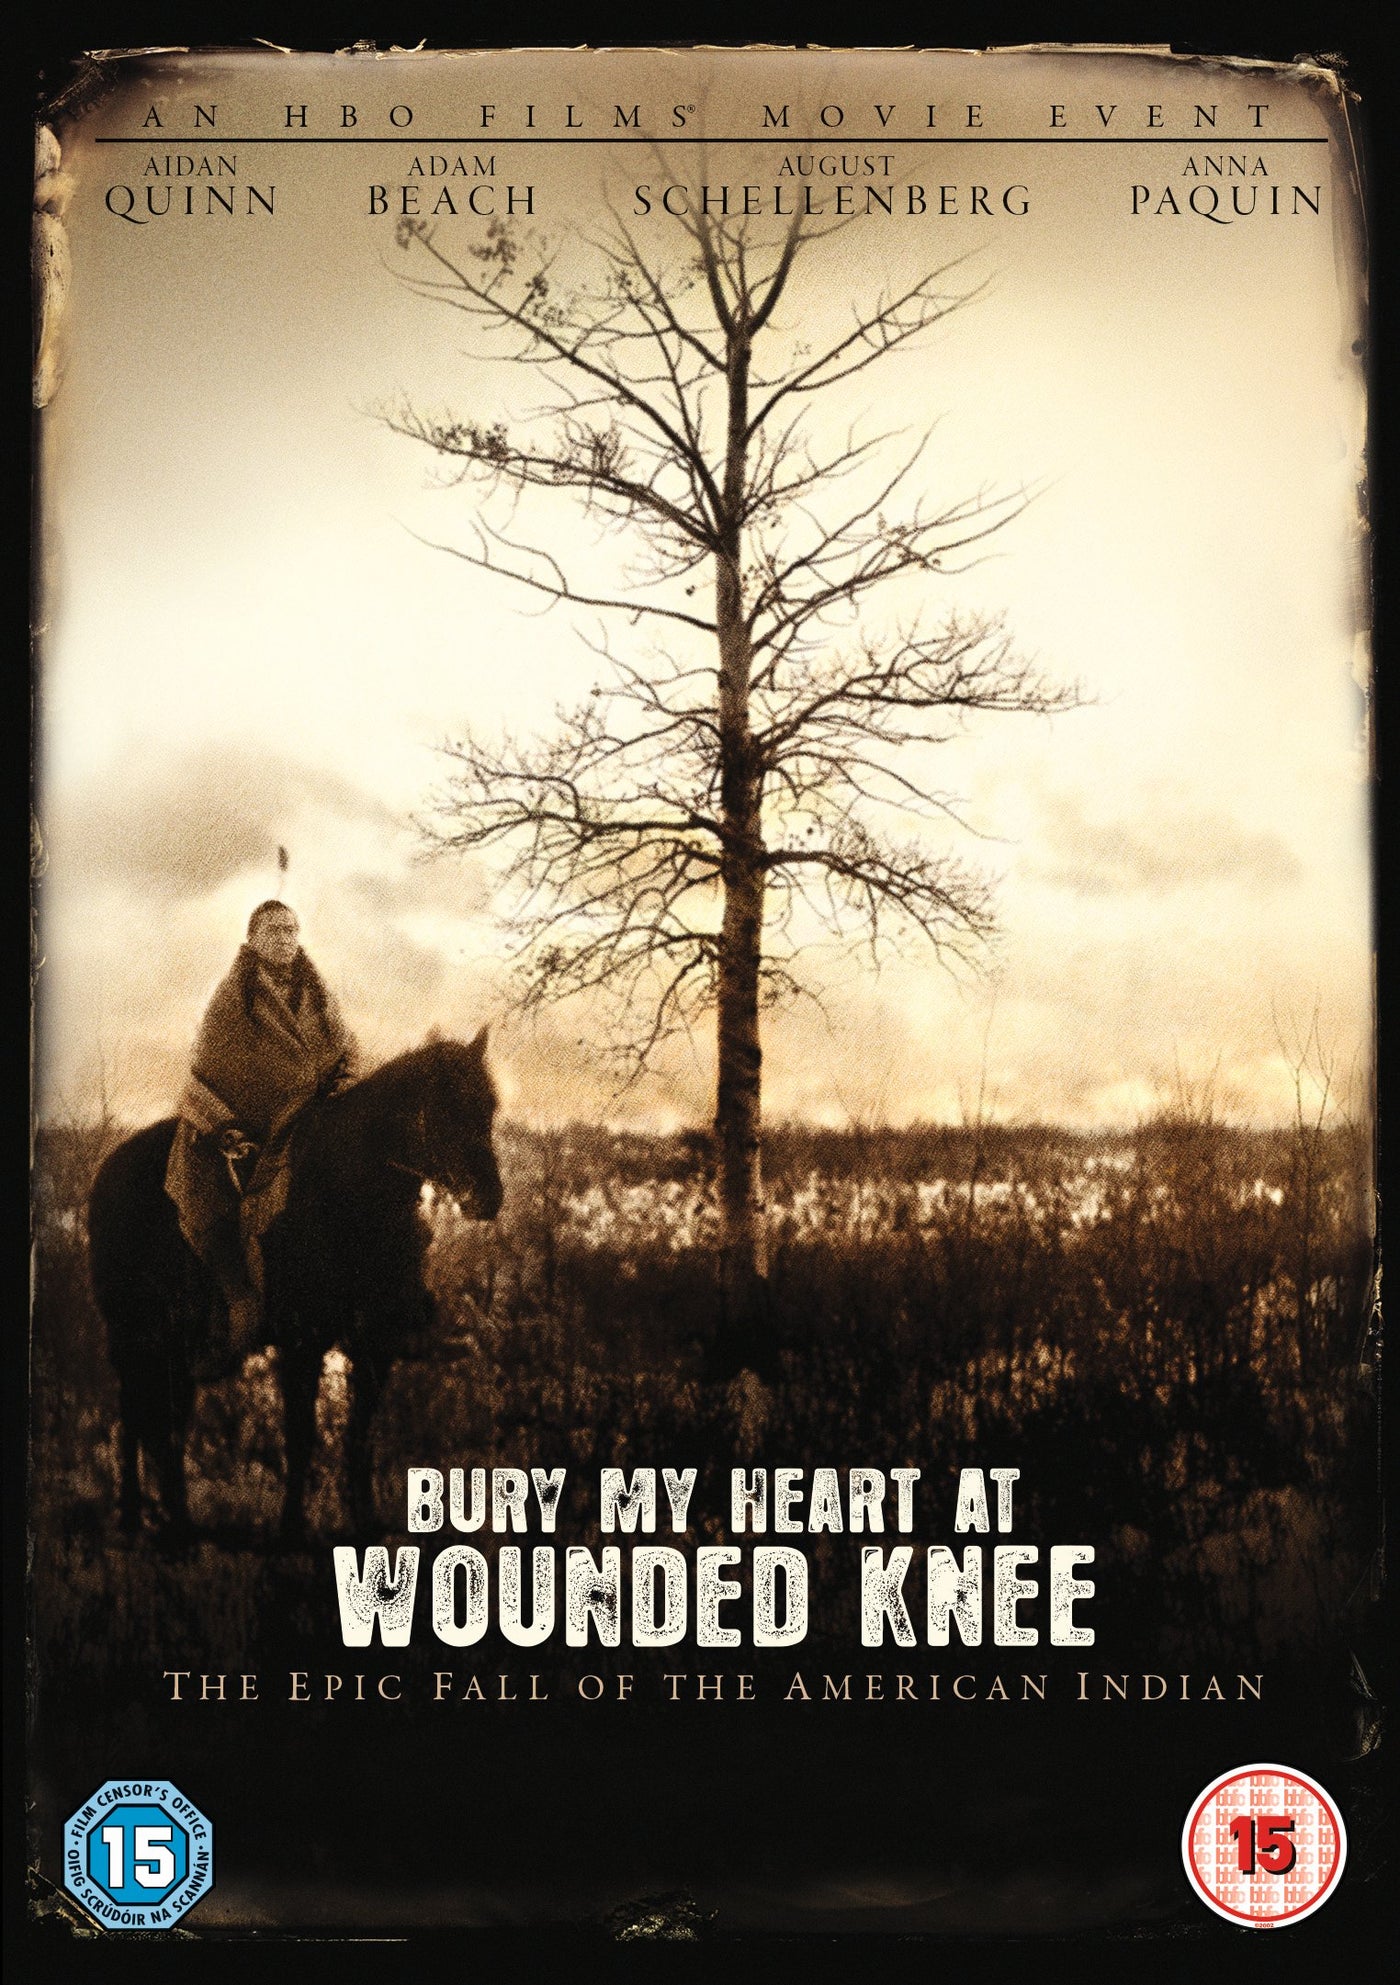 Bury My Heart At Wounded Knee (HBO) (DVD)